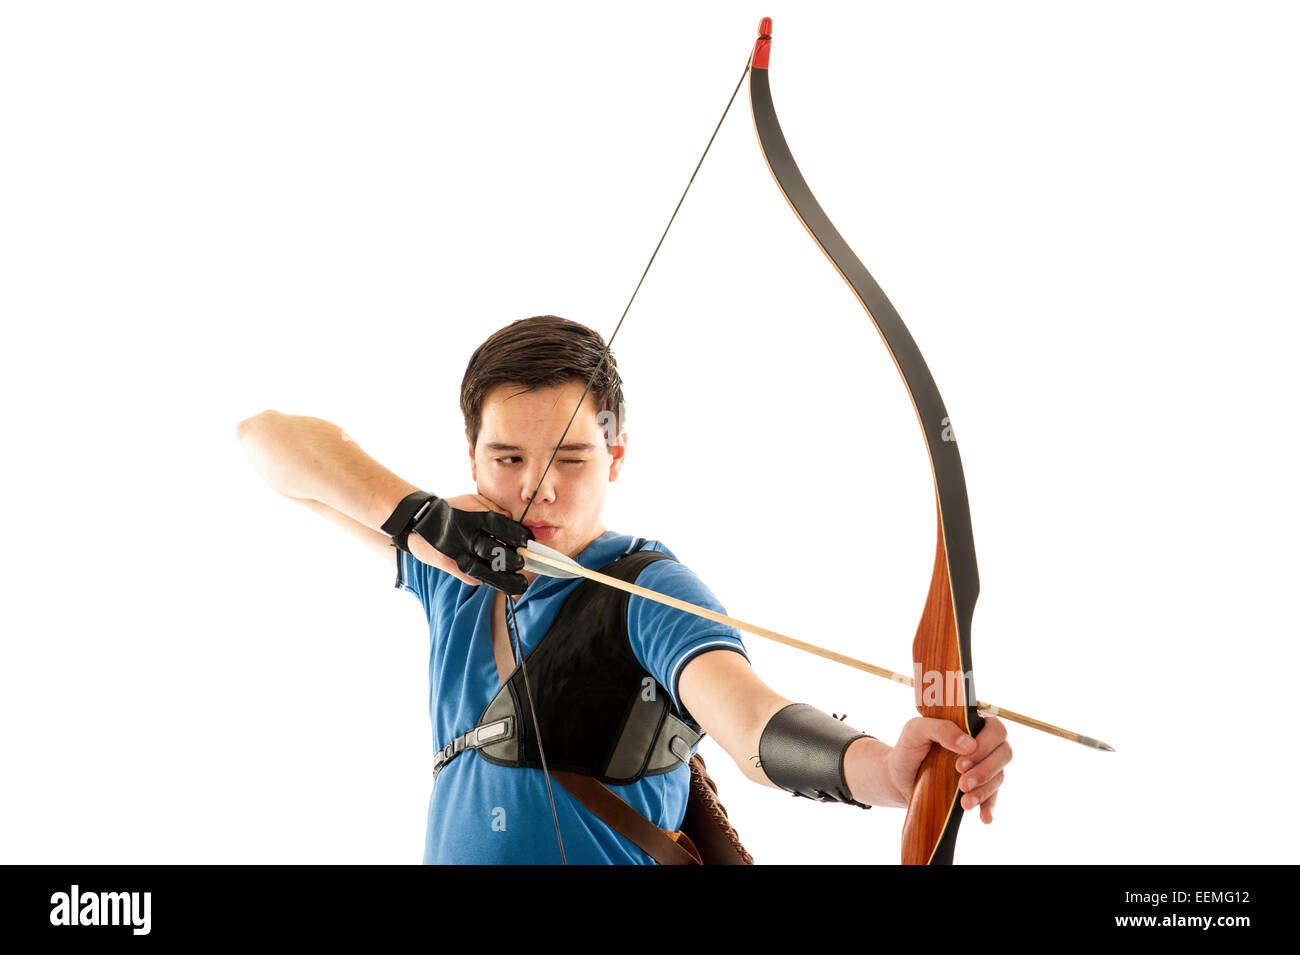 Boy with blue shirt aiming with bow and arrow Stock Photo